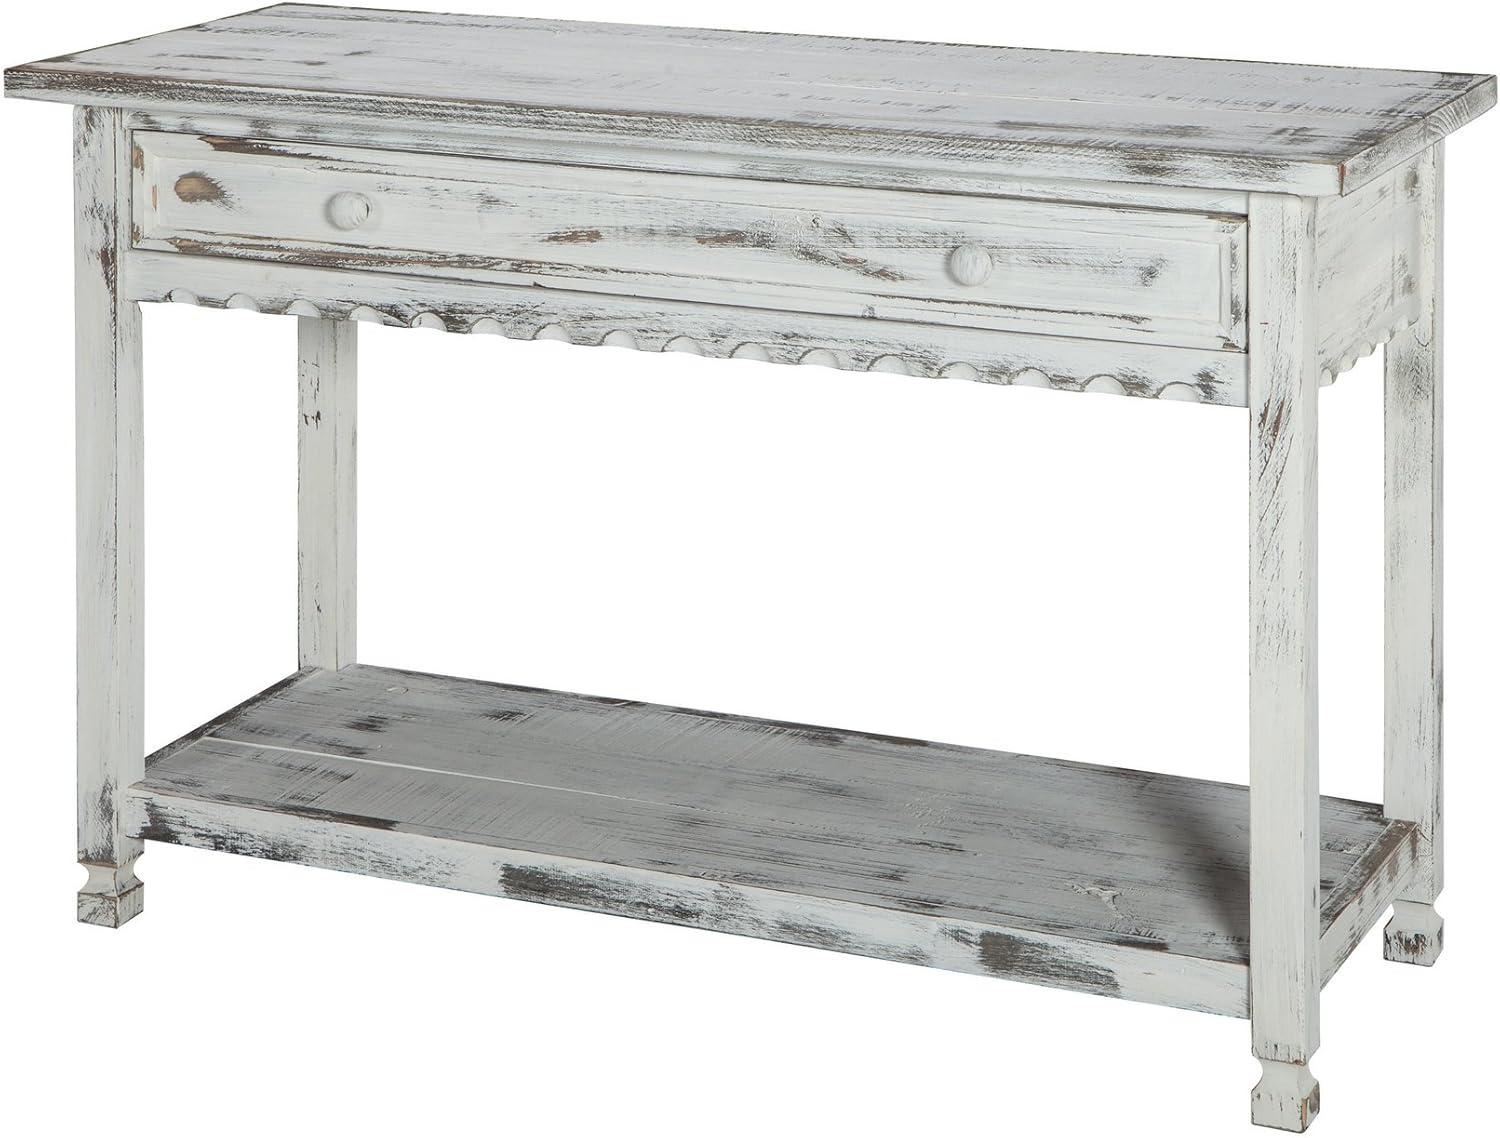 Antique White Cottage-Inspired Media Console with Storage Shelf